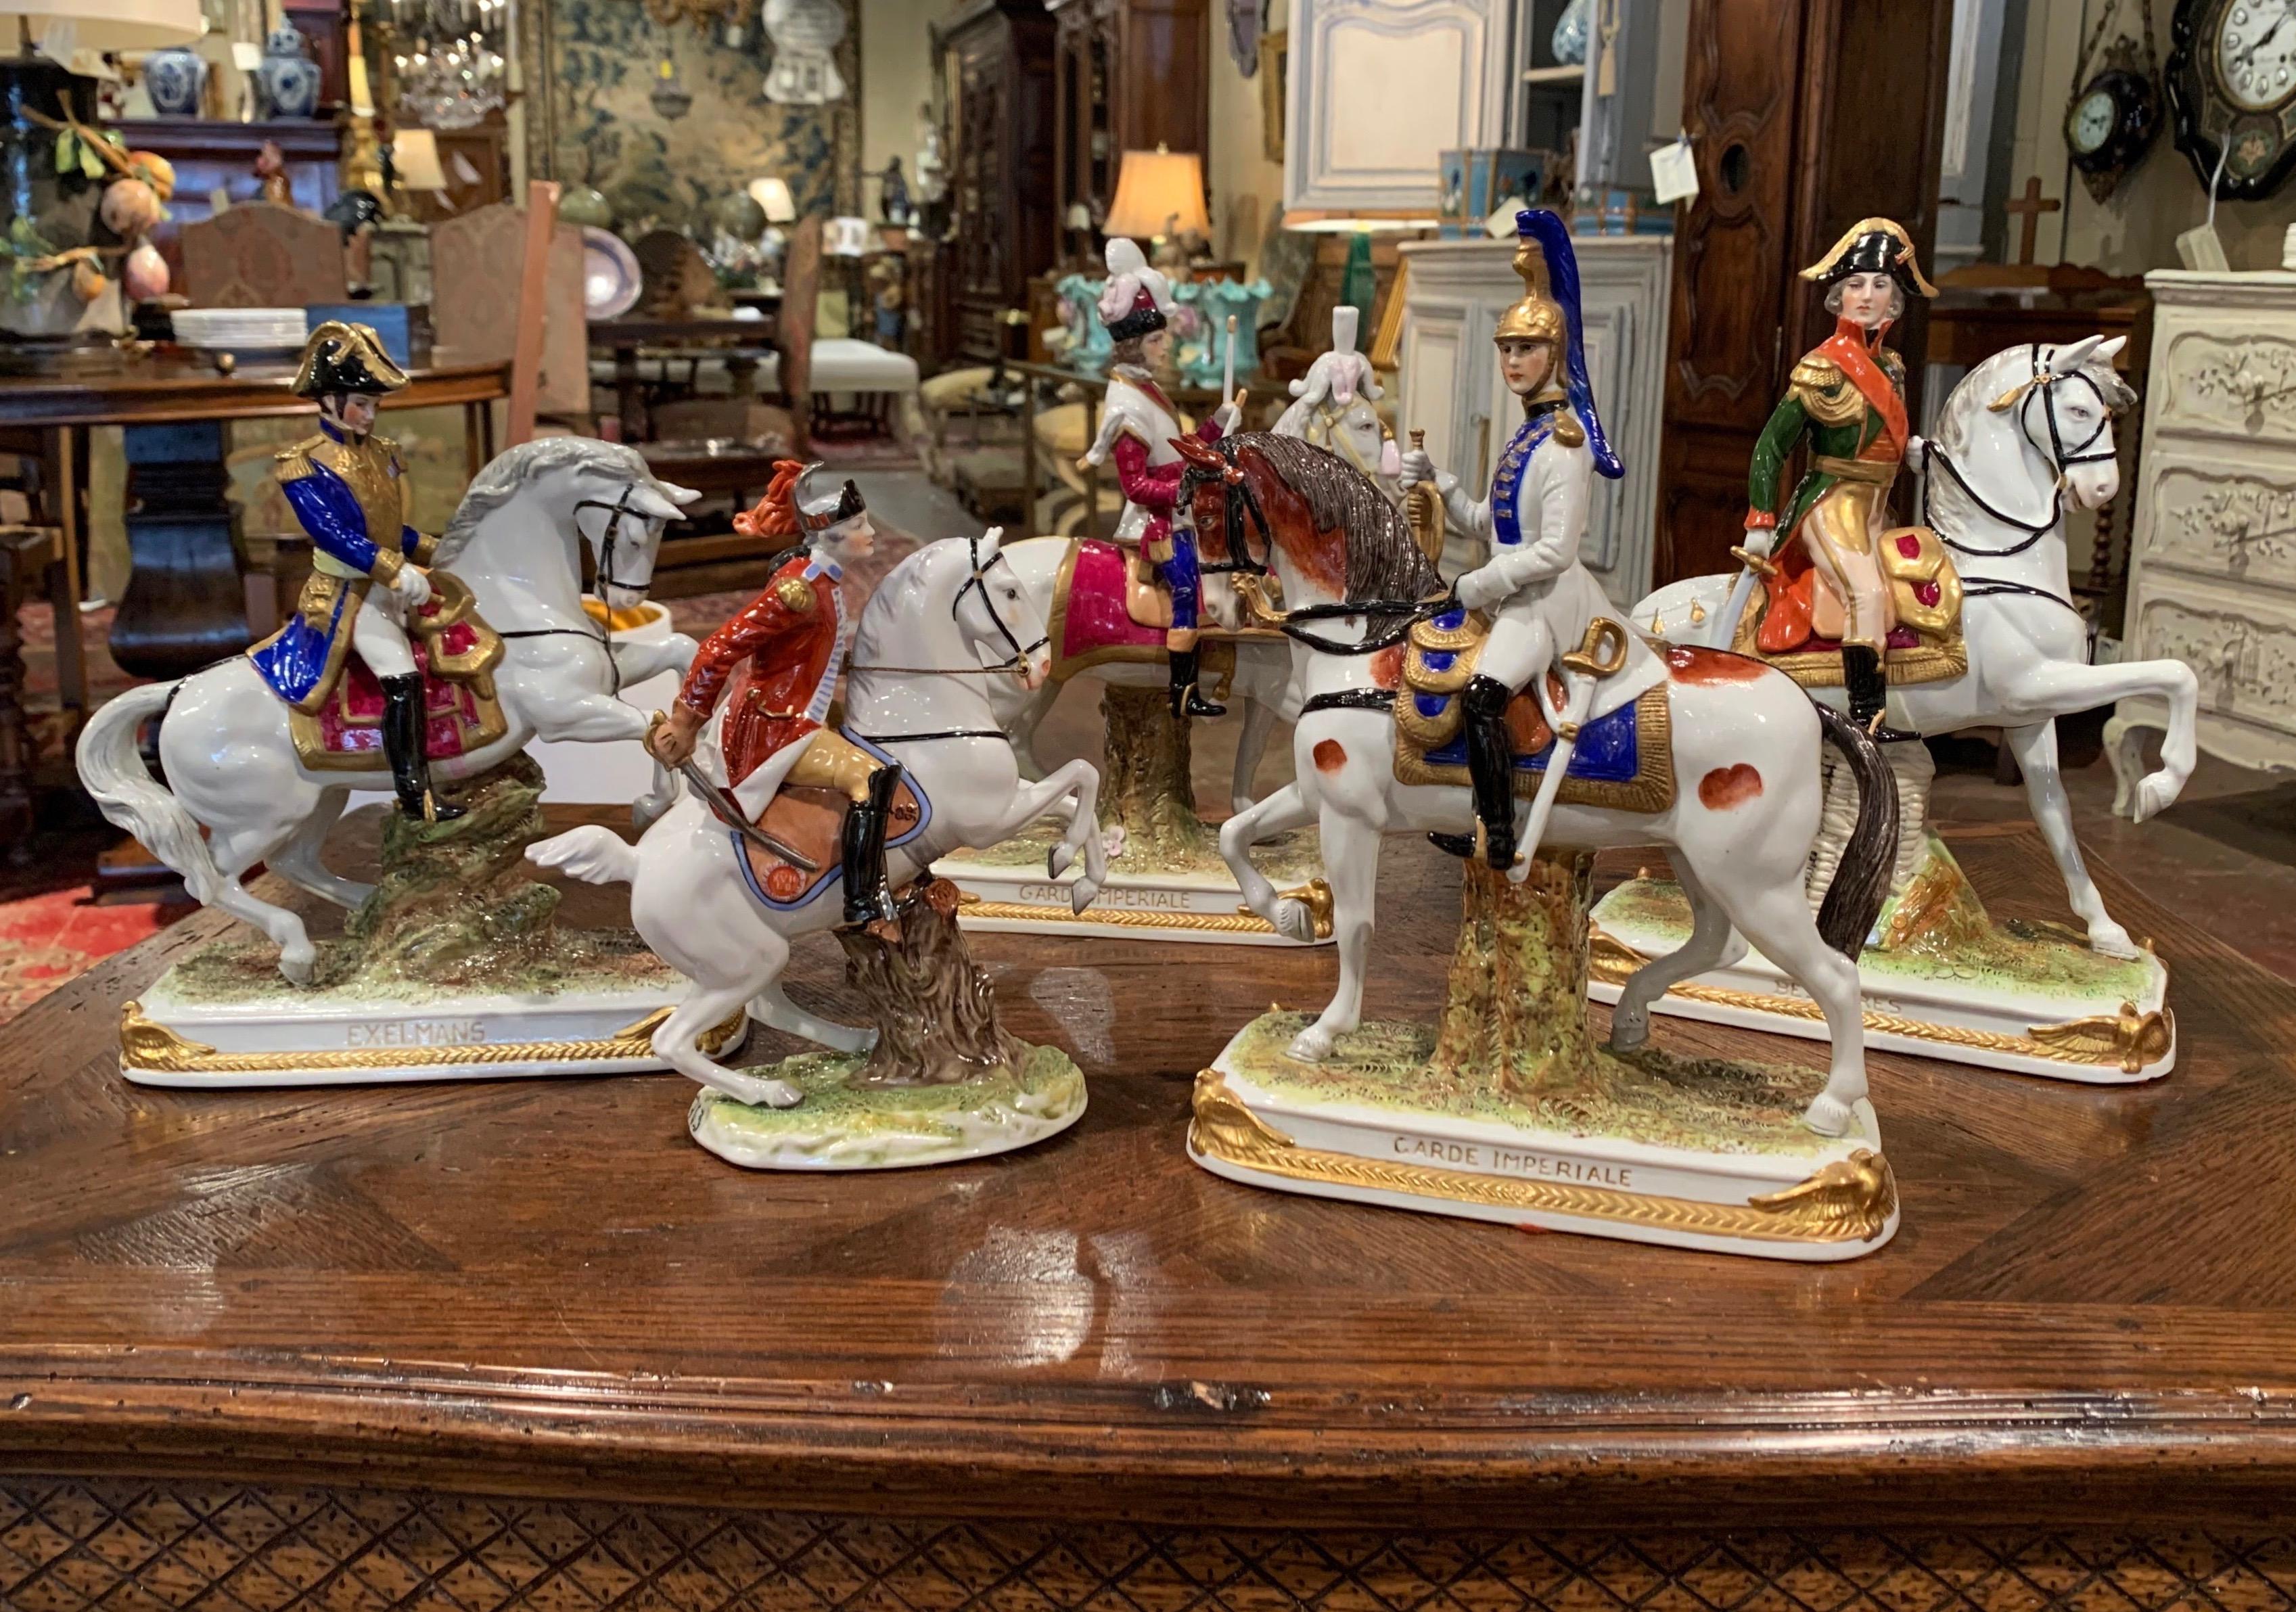 Decorate a shelf with this elegant set of porcelain horses and riders figurines. Crafted in Germany circa 1960, each hand painted colorful figure is marked with a crown and N mark (attributed to Potschappel, founded by Carl Thieme in 1872, Saxony,